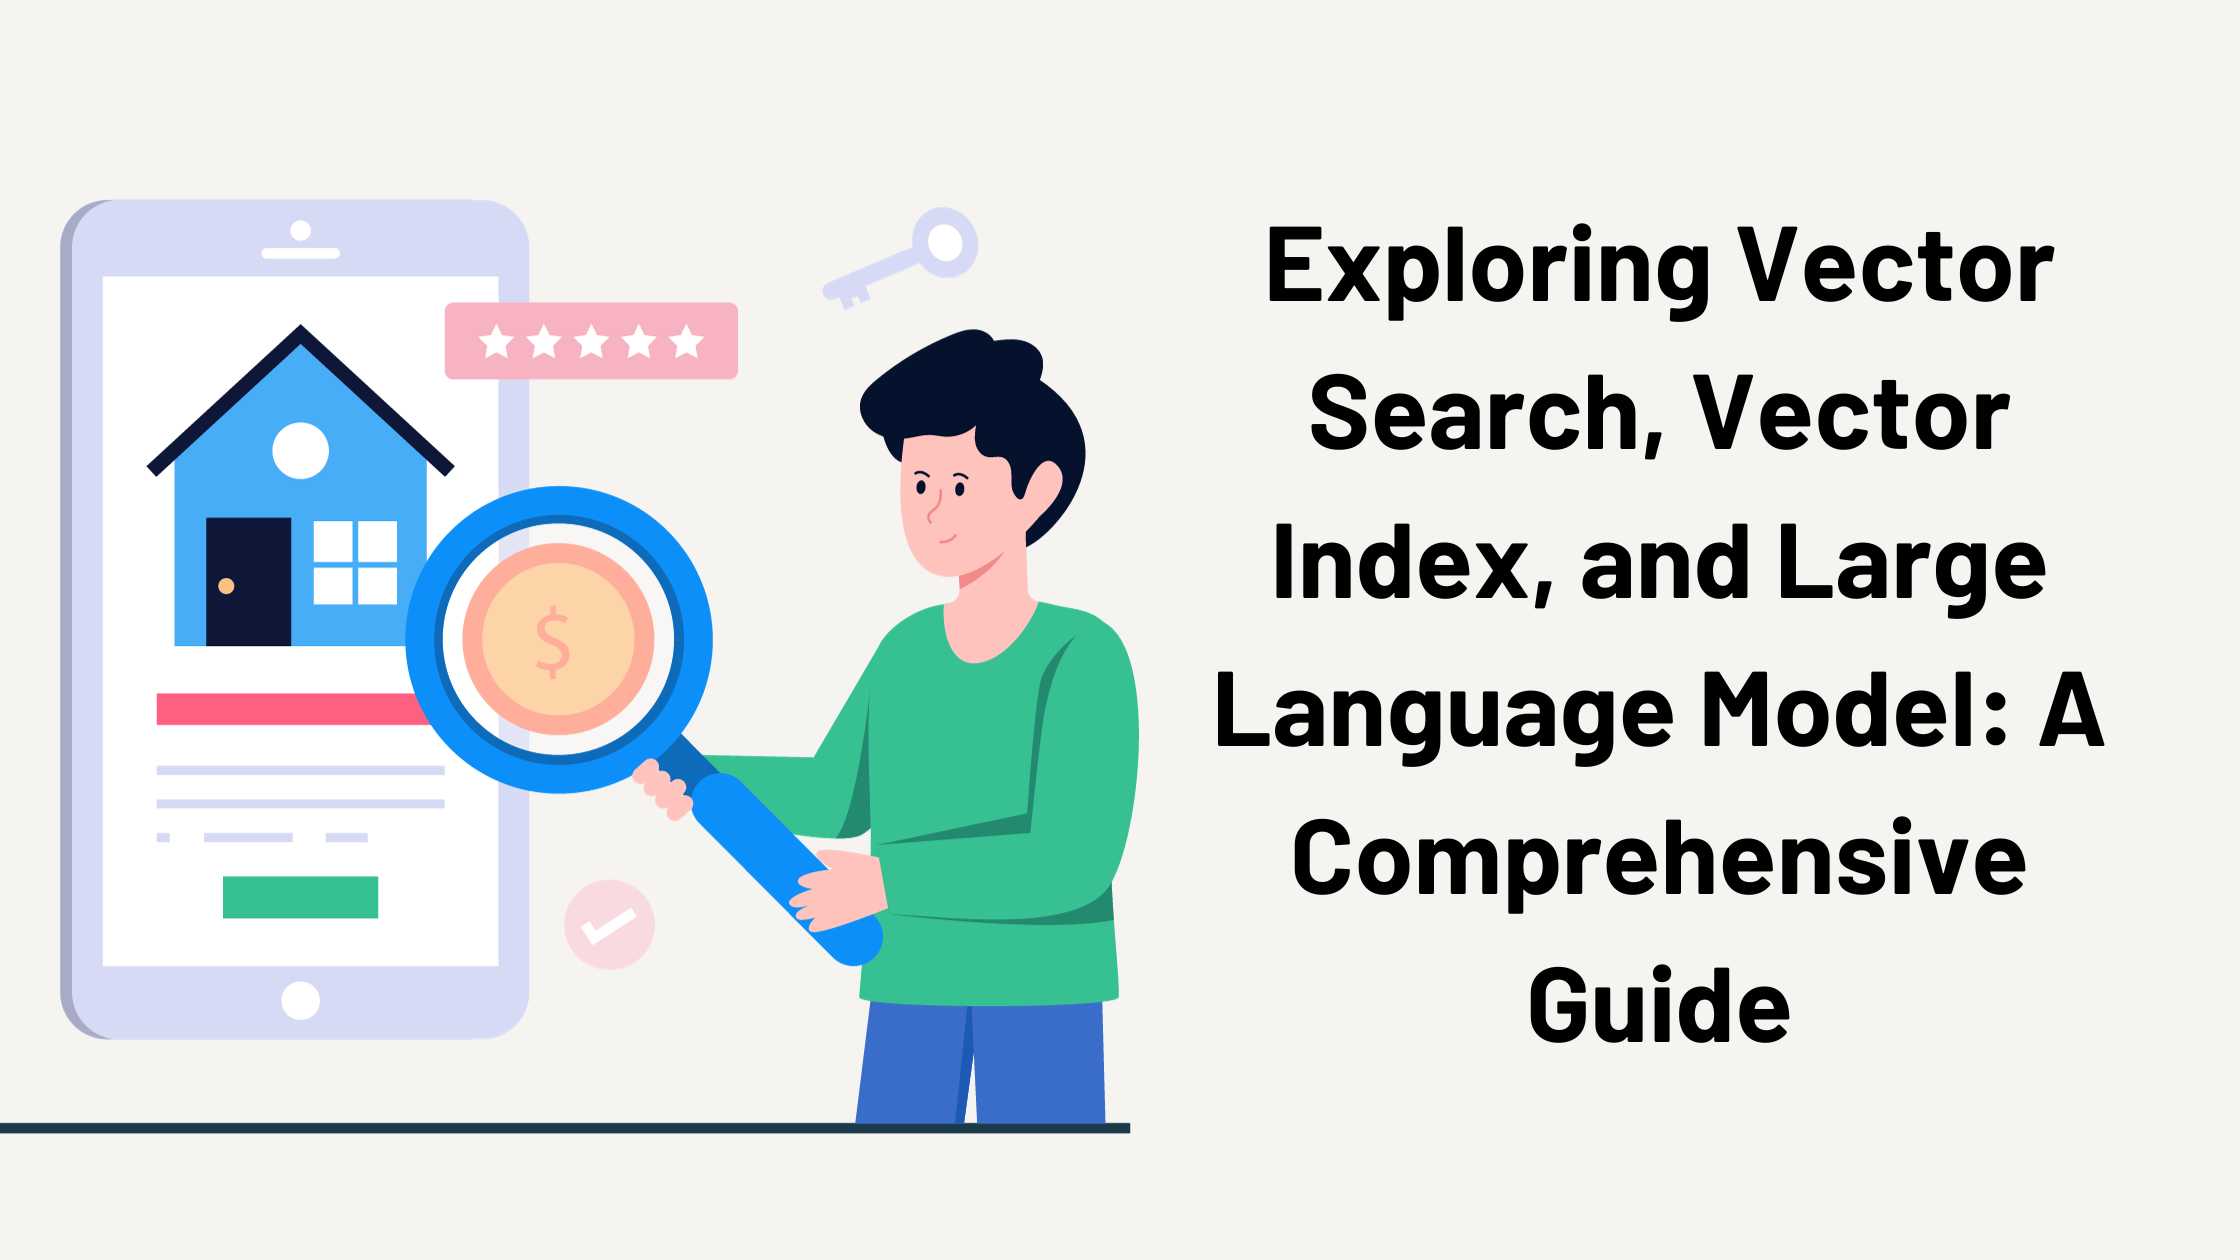 Exploring Vector Search, Vector Index, and Large Language Model: A Comprehensive Guide